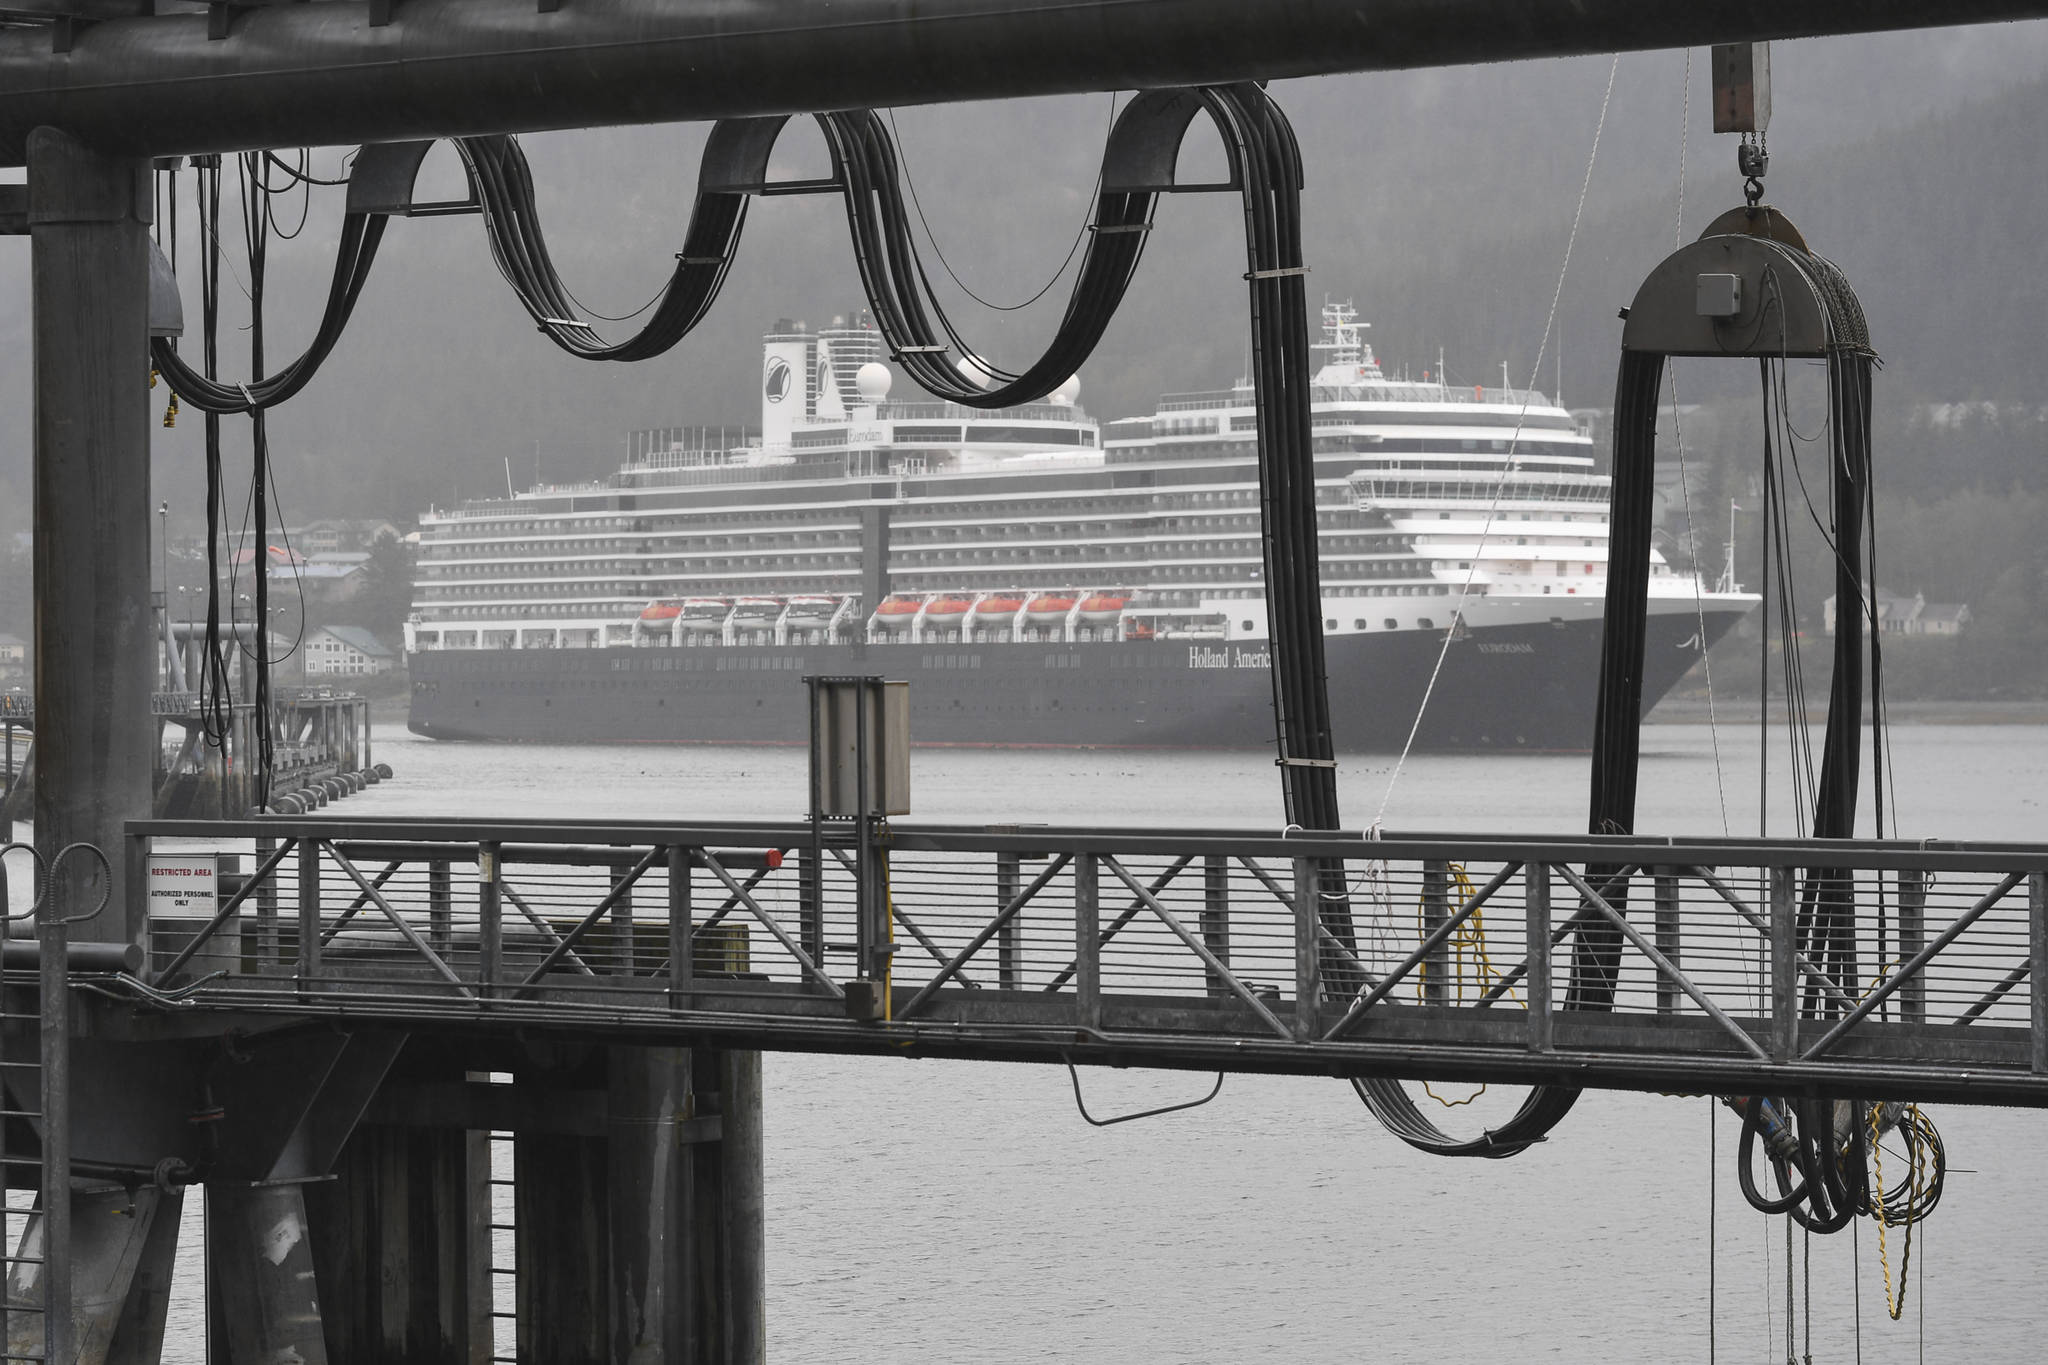 The Holland America Line Eurodam pulls into Juneau’s downtown harbor heading for the city-owned dock on Monday, May 6, 2019. The privately owned South Franklin Dock, foreground, is currently the only dock set up to provide electric power to a ship while at berth in Juneau. (Michael Penn | Juneau Empire)